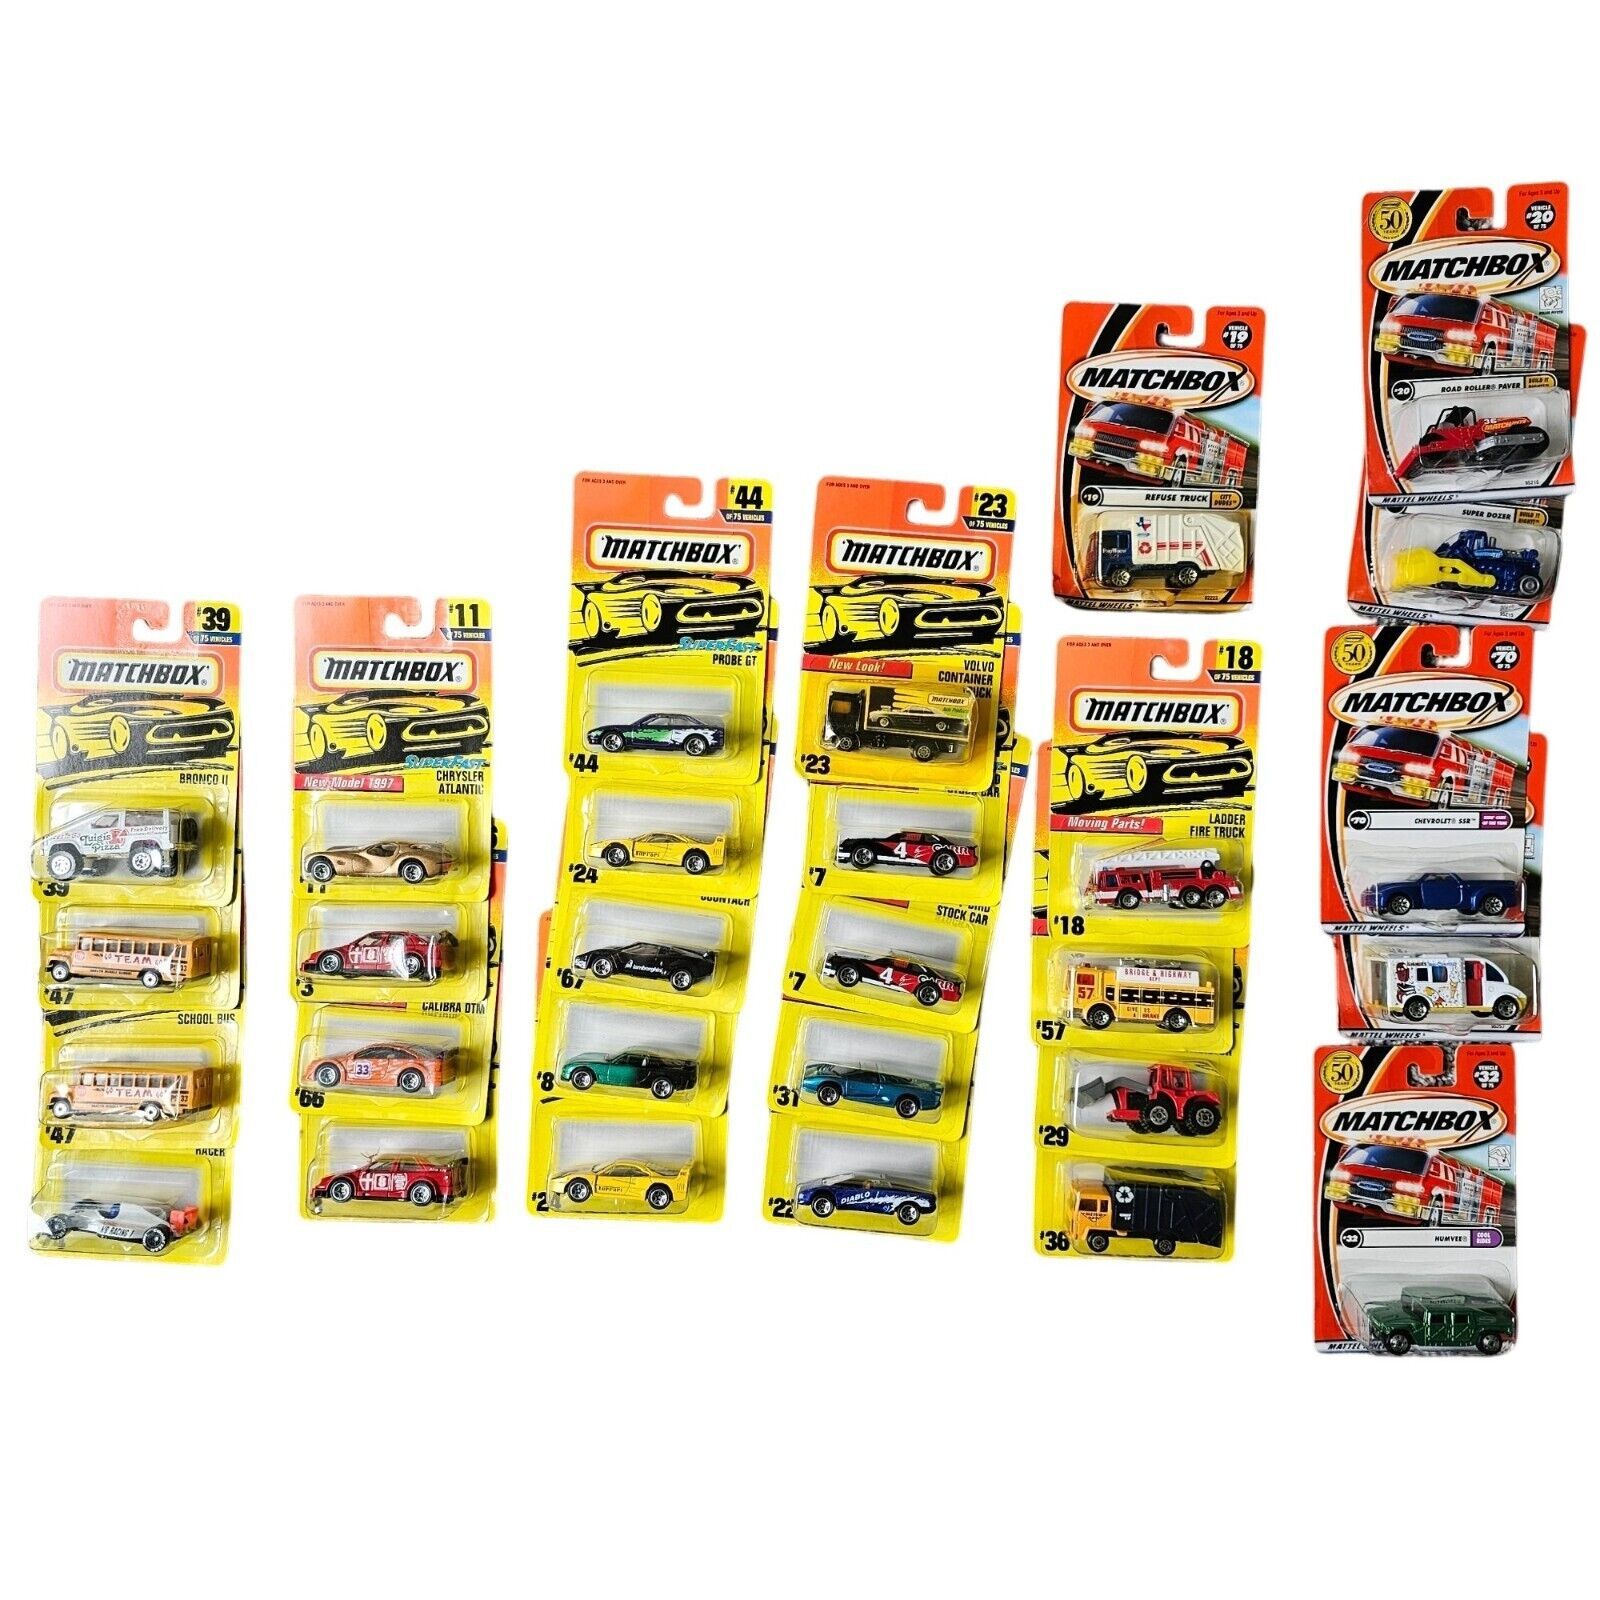 Primary image for Matchbox Toy Cars 1996 and 2001 Including New Models 1997 28 Cars